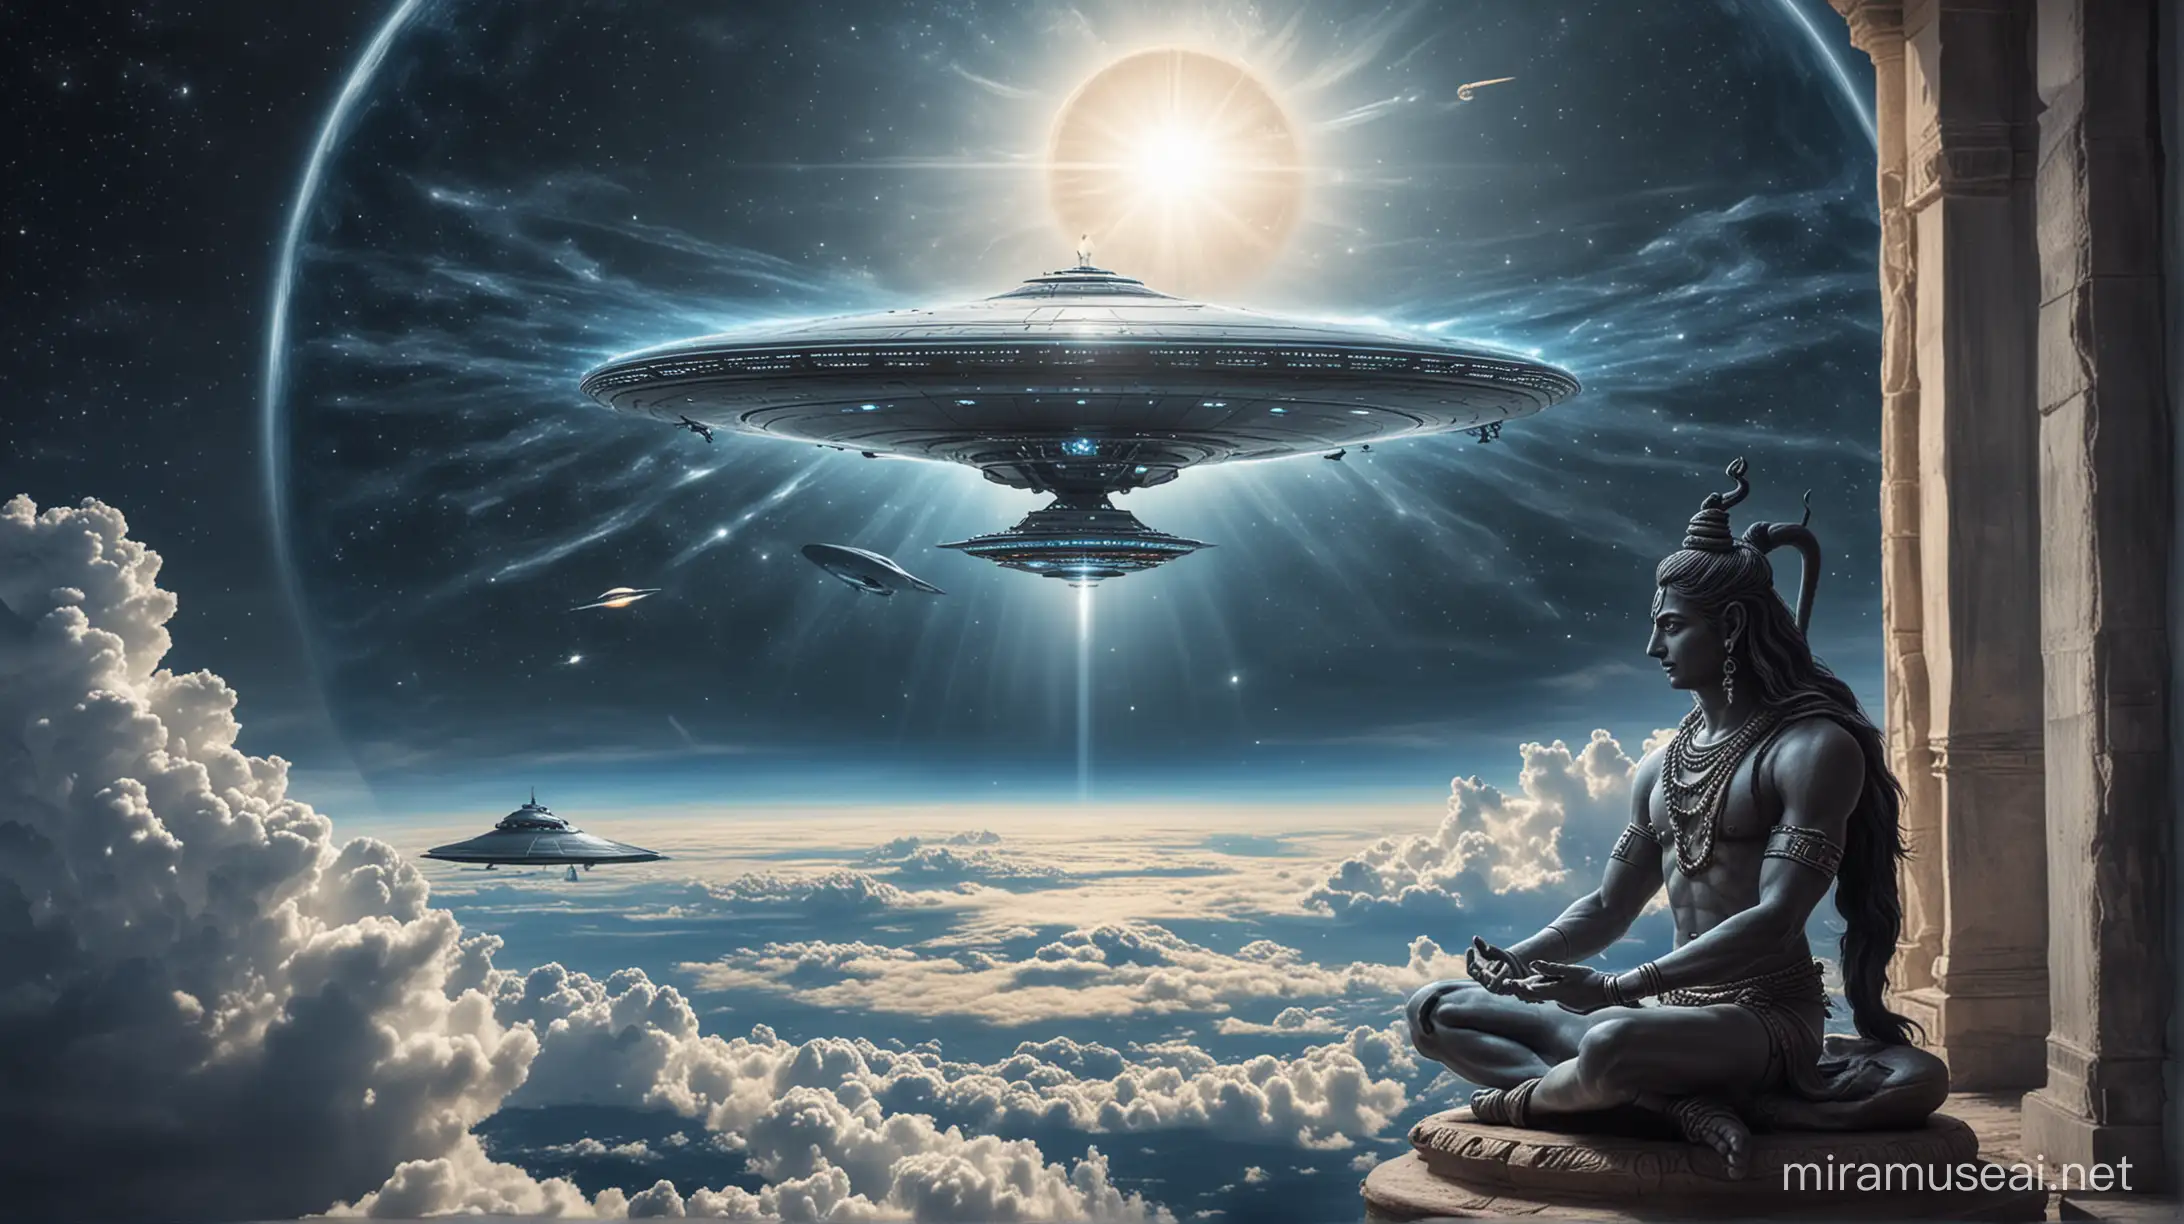 lord shiva  is sitting in the front window piloting a UFO, looking towards the earth from sister. Make a photo like this.